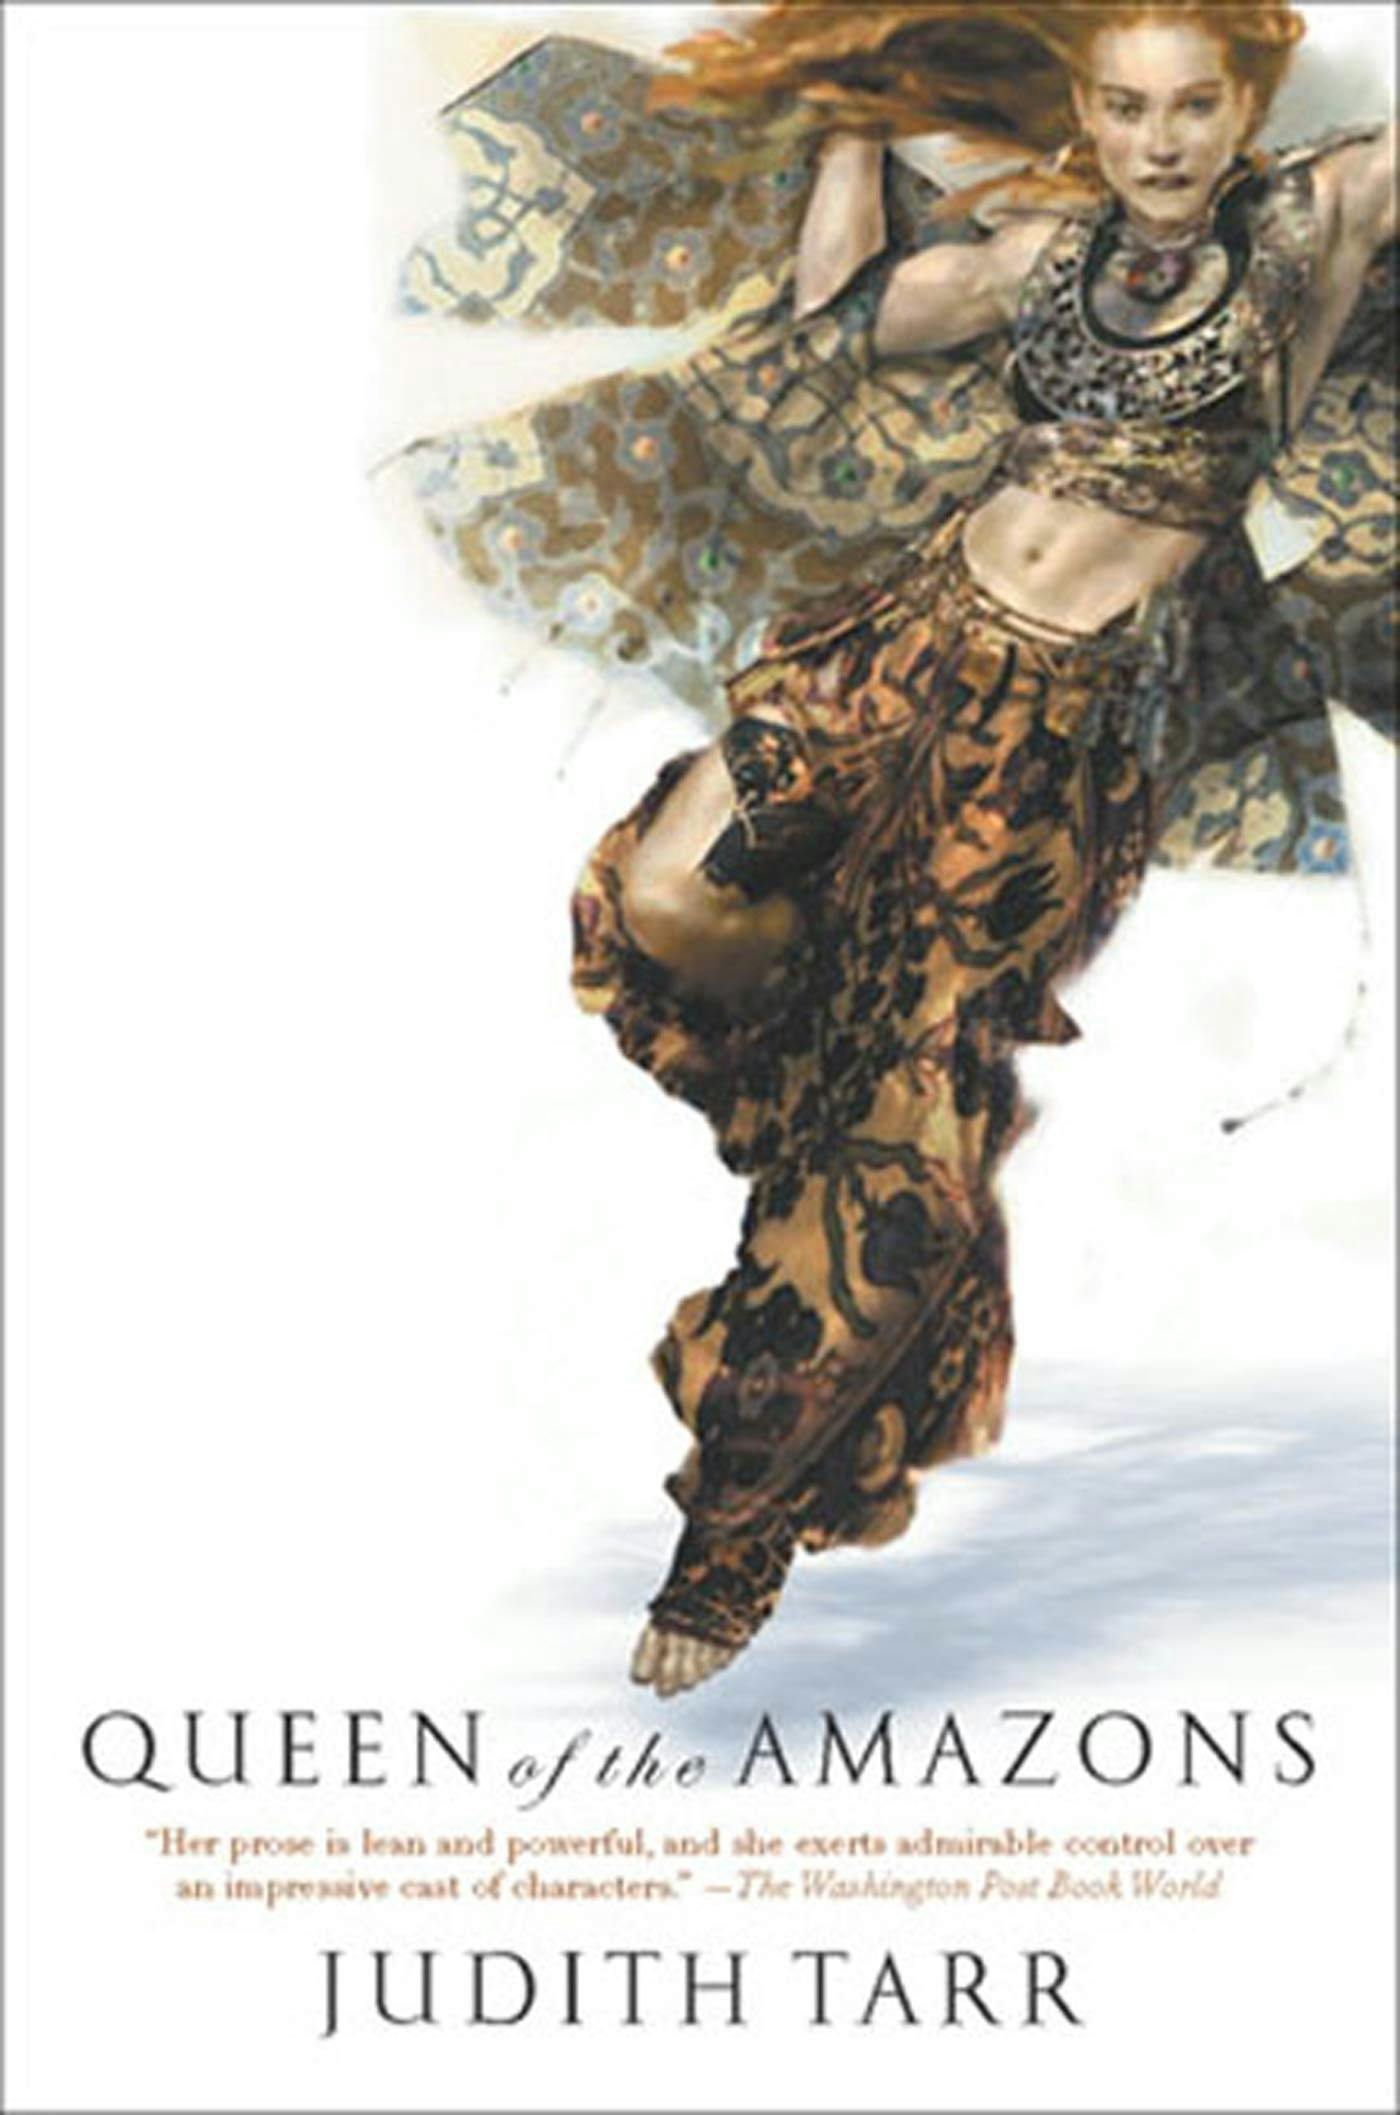 Cover for the book titled as: Queen of the Amazons